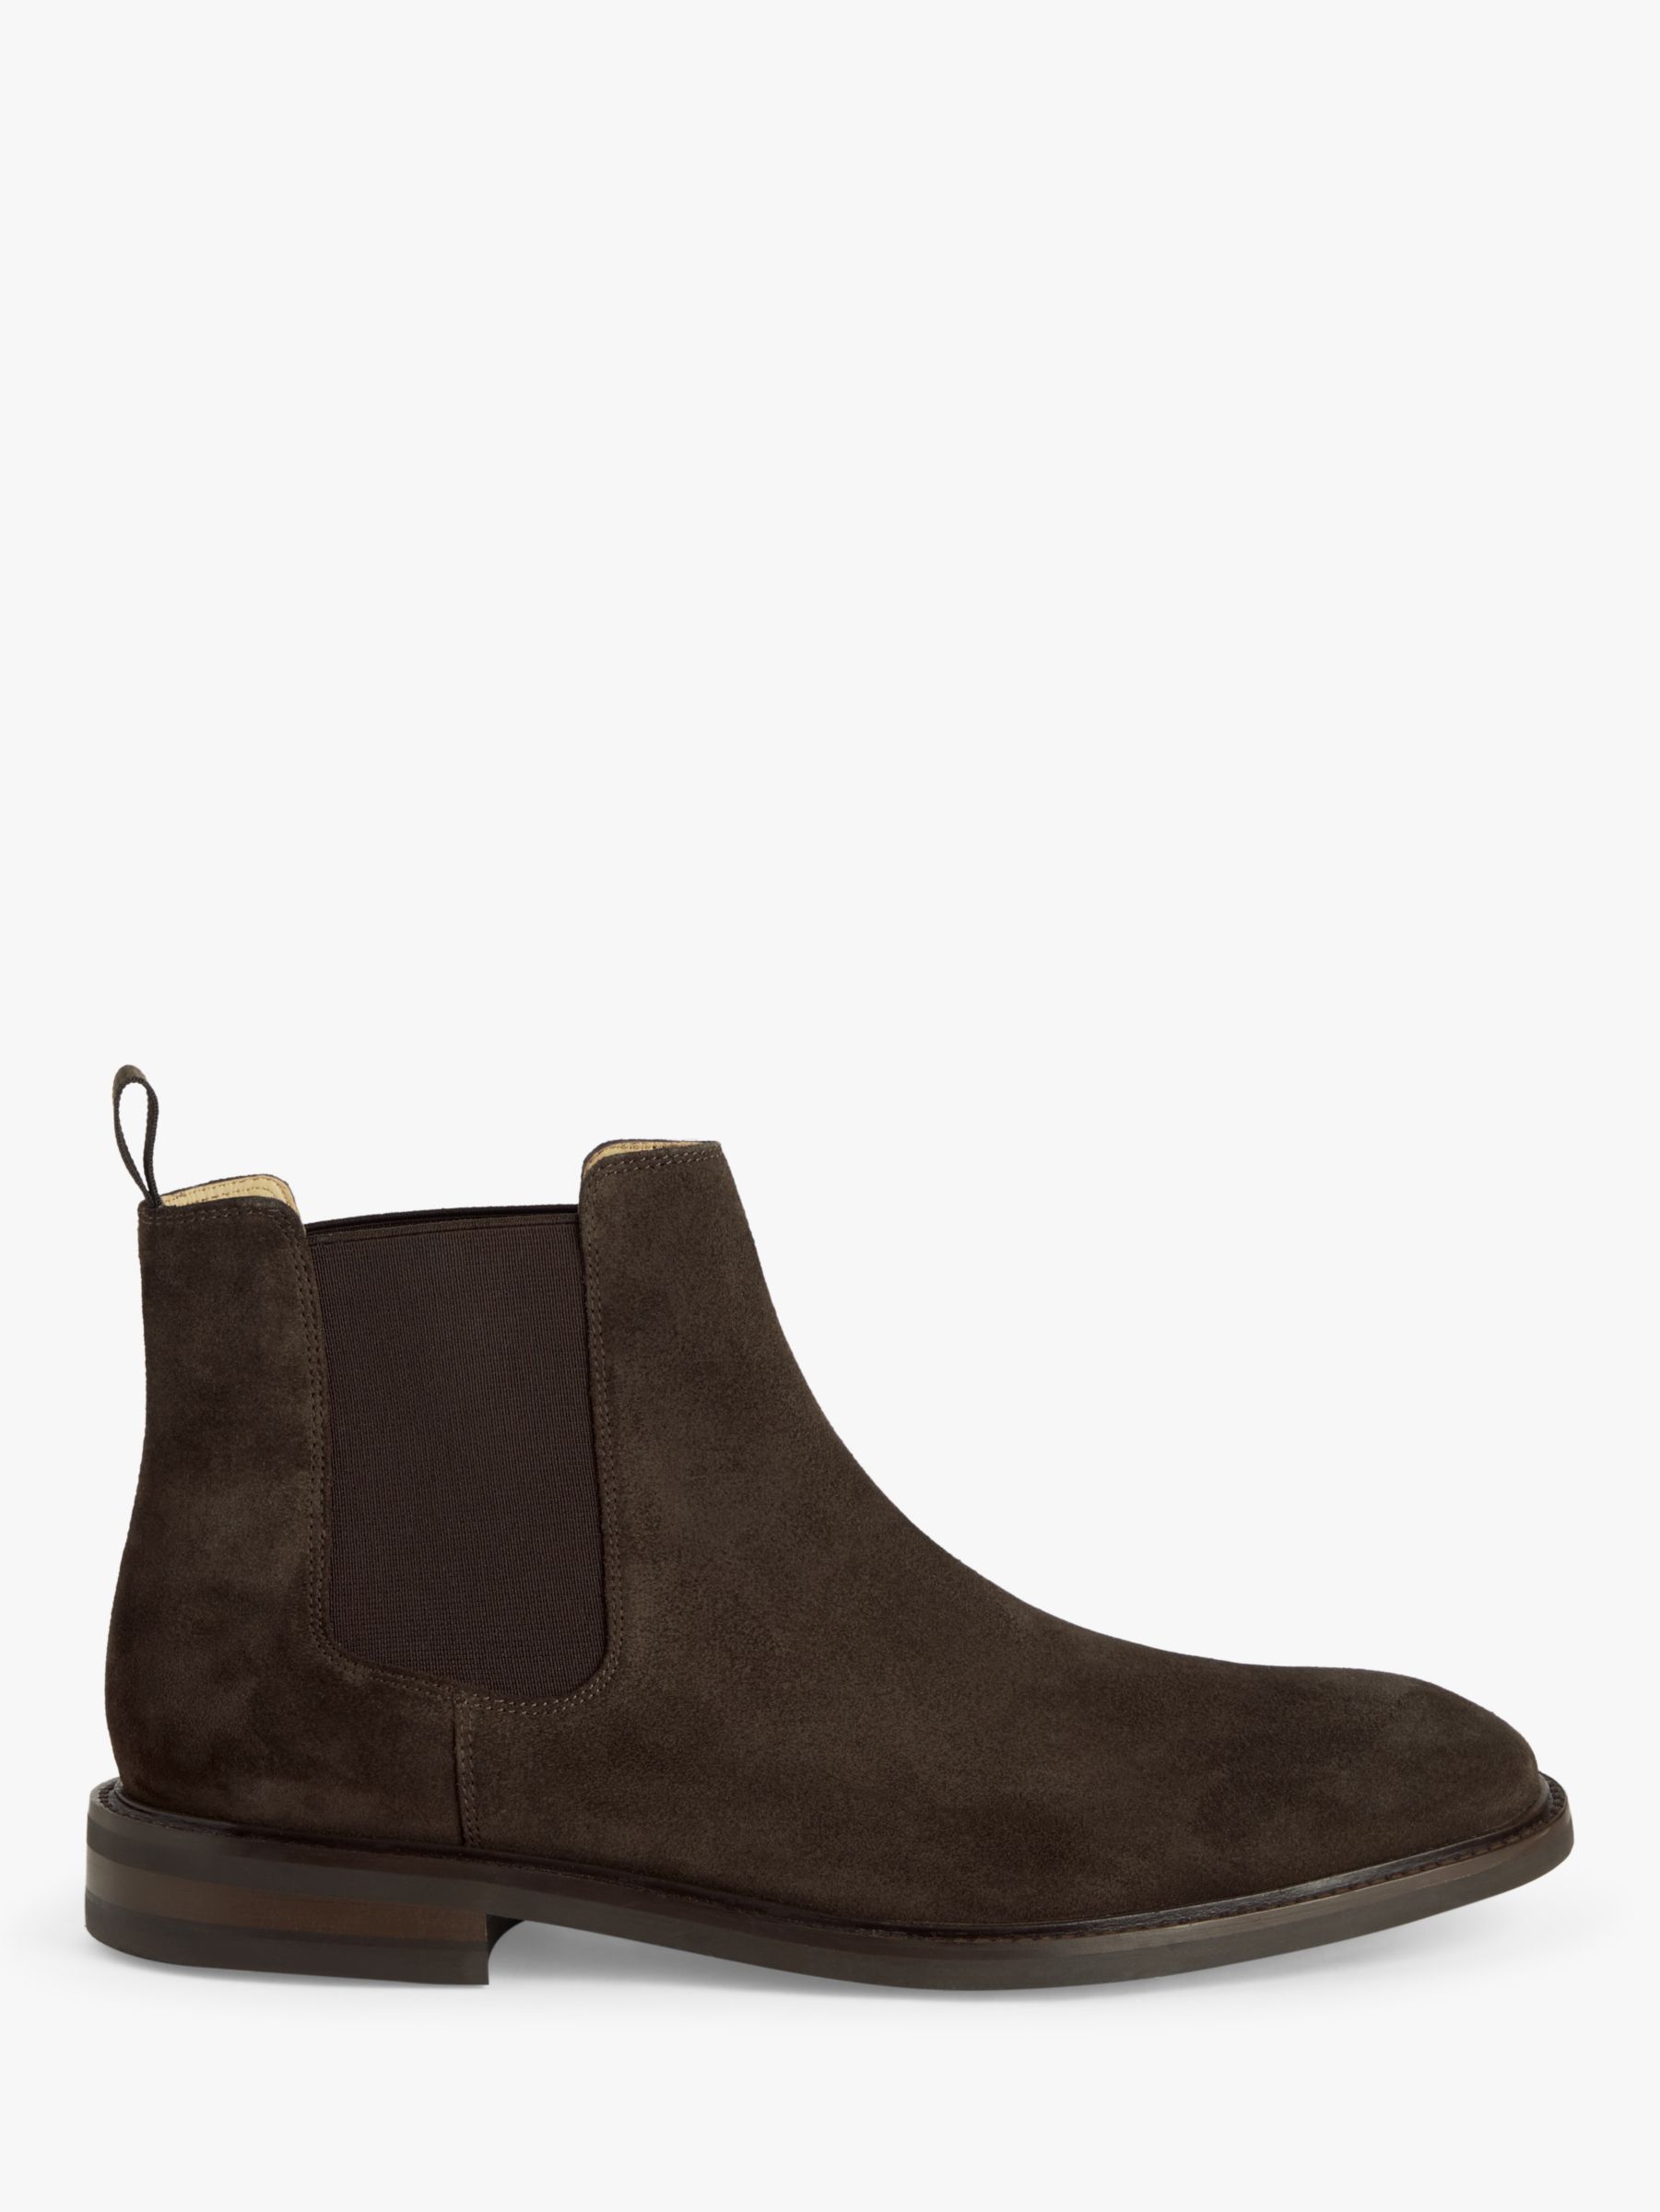 John Lewis Suede Chelsea Boots, Brown Mid at John Lewis & Partners